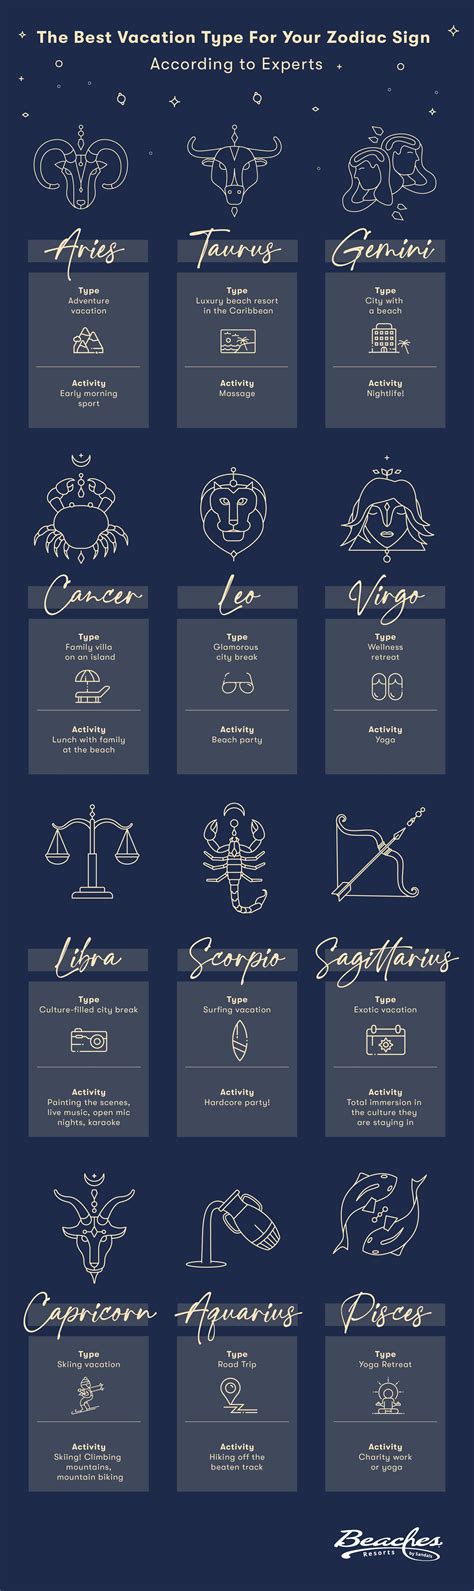 The Best Vacation By Zodiac Sign Which Is Right For You